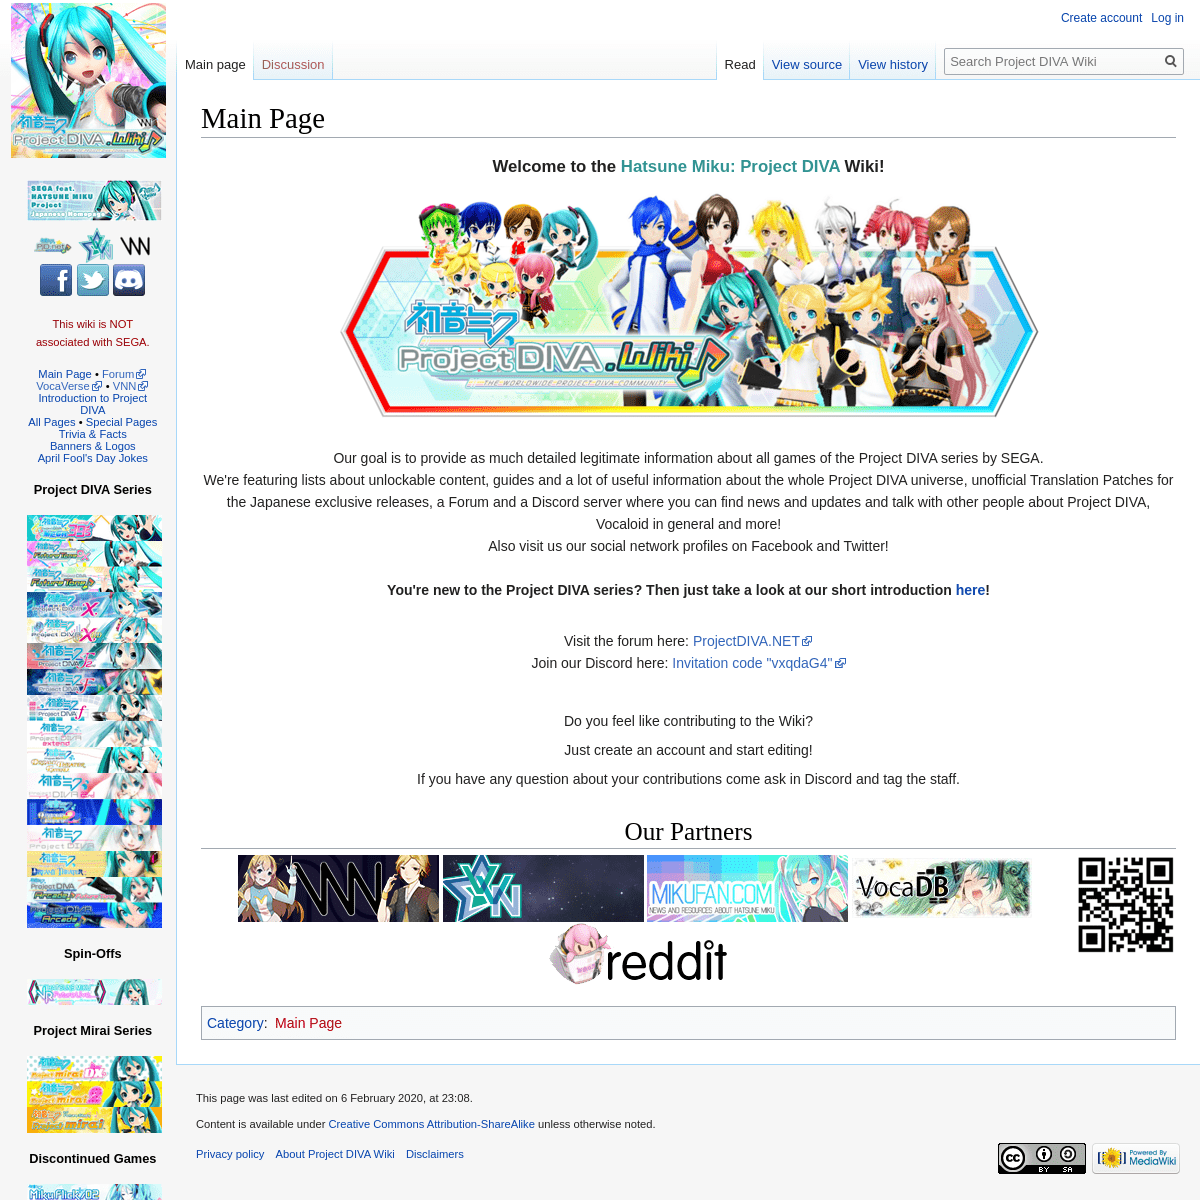 A complete backup of projectdiva.wiki